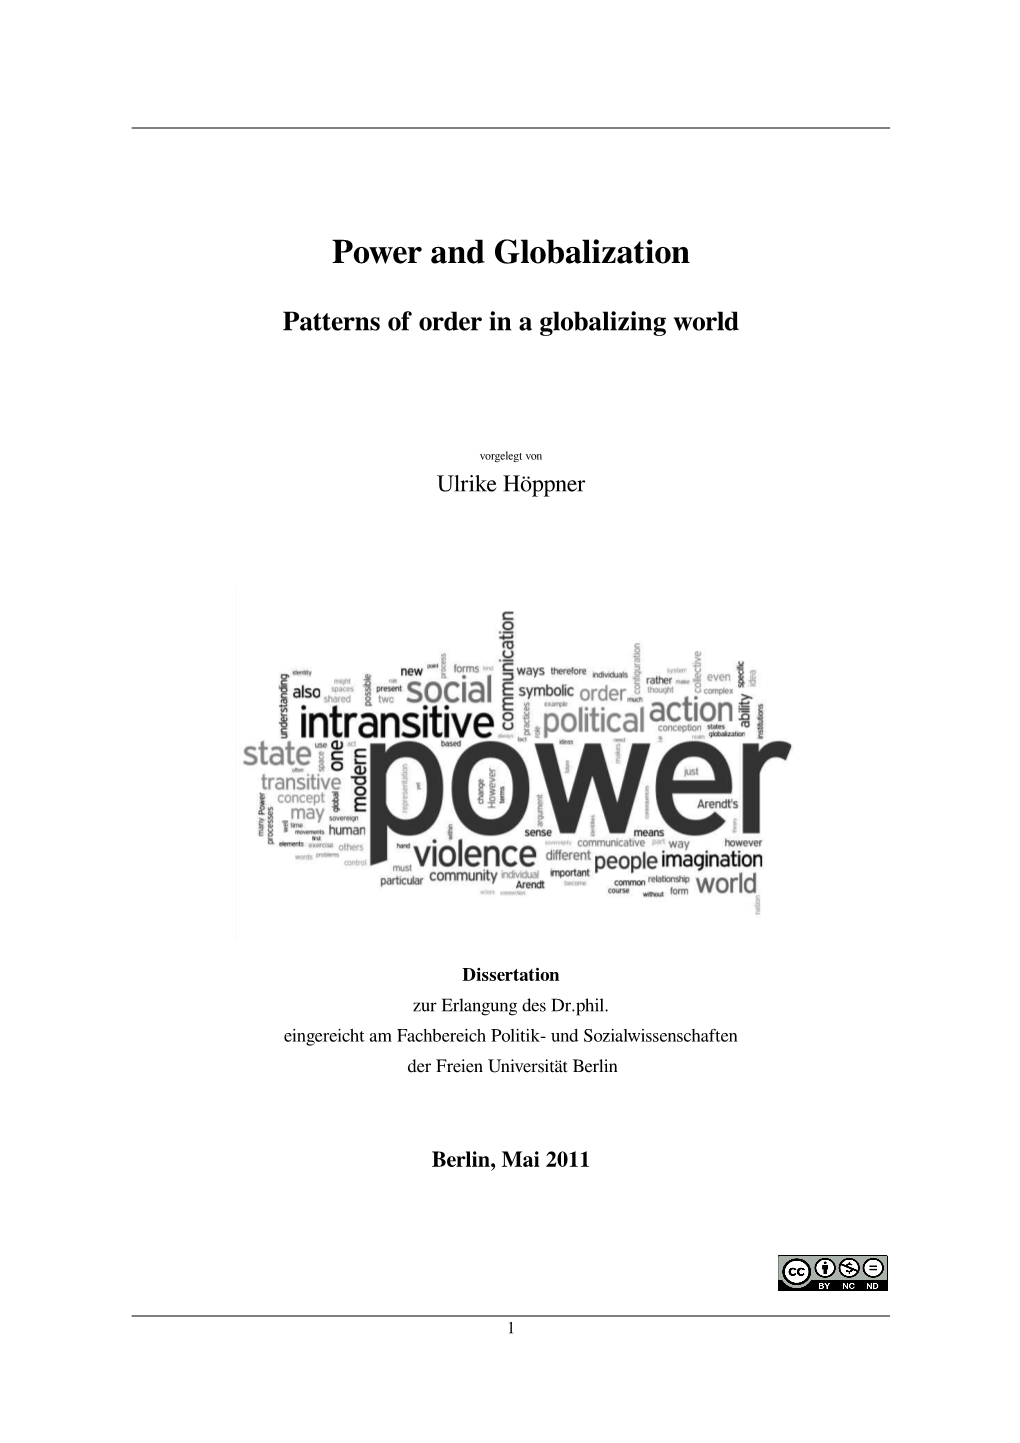 Power and Globalization